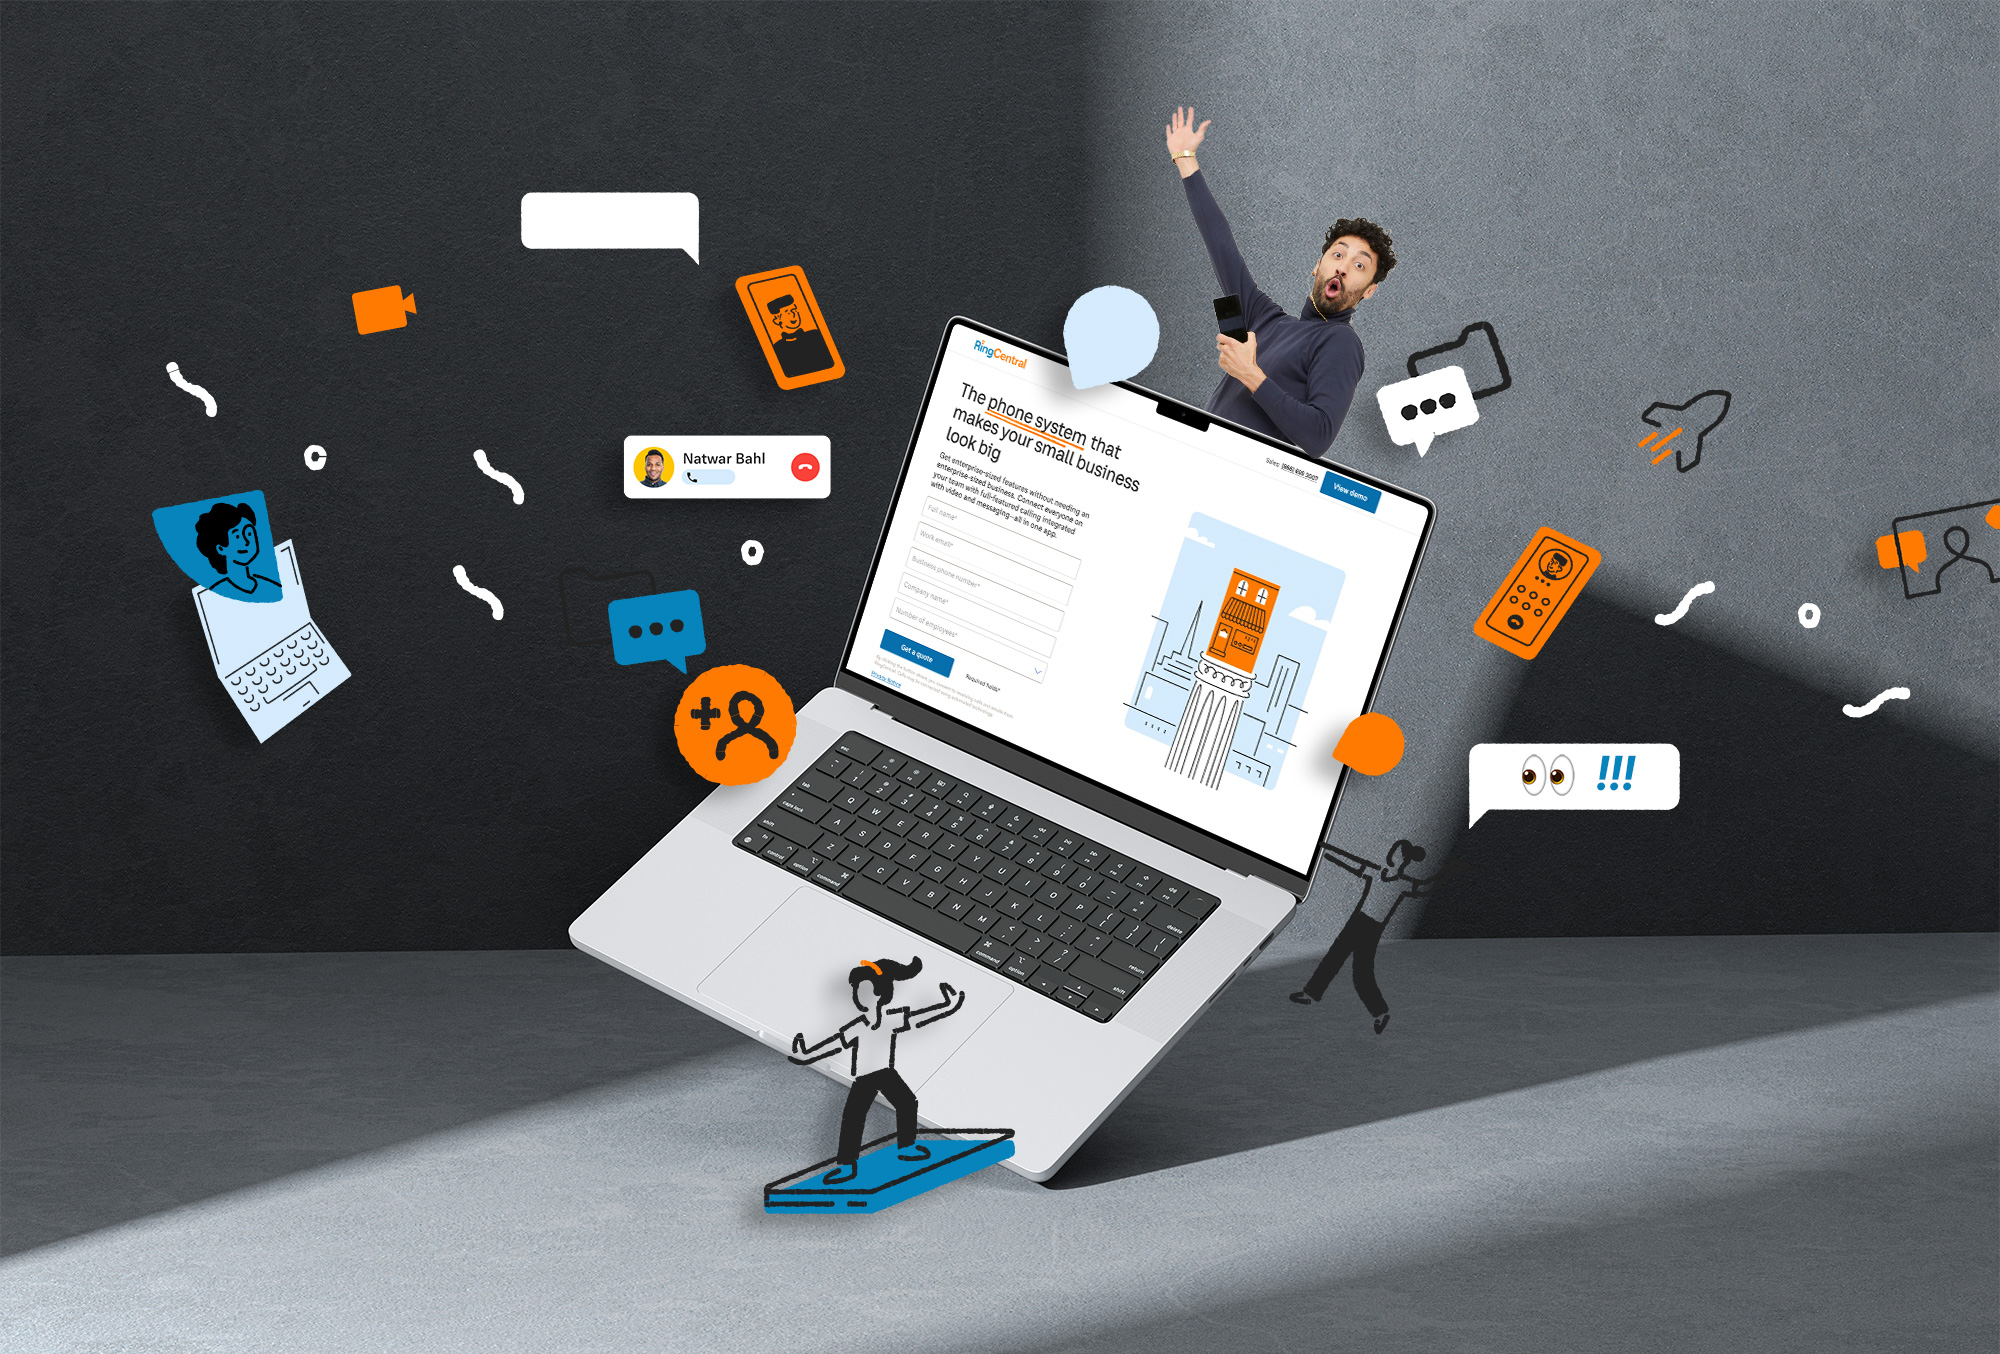 Work for RingCentral